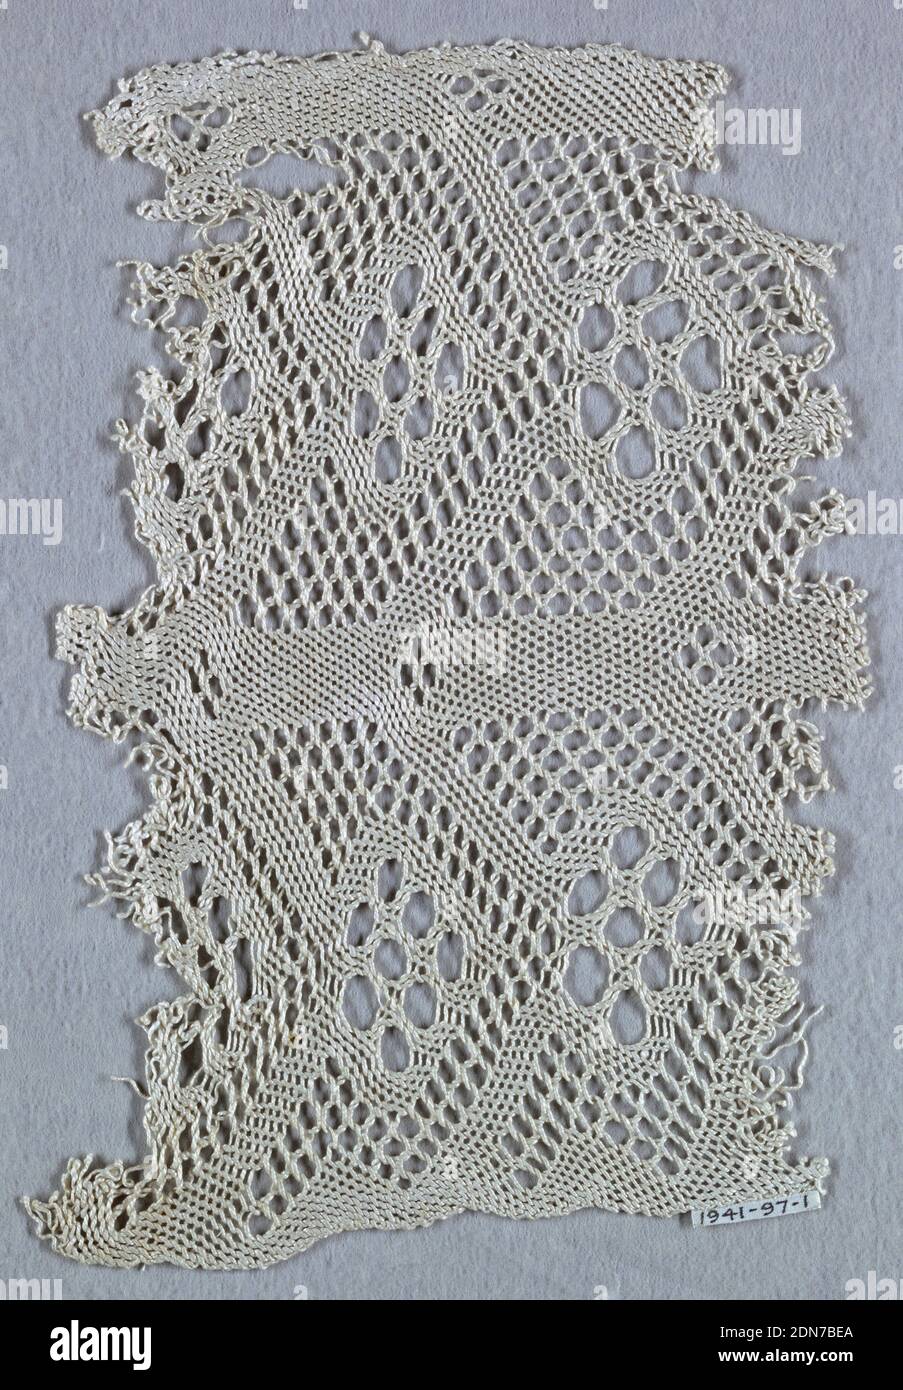 Fragment, Medium: linen Technique: sprang, Pattern of upright bars with projecting diagonals that meet to form lozenge shapes worked in twisted threads. The mesh is hexagonal and has two sizes., Slovakia, 18th century, non-woven textiles, Fragment Stock Photo